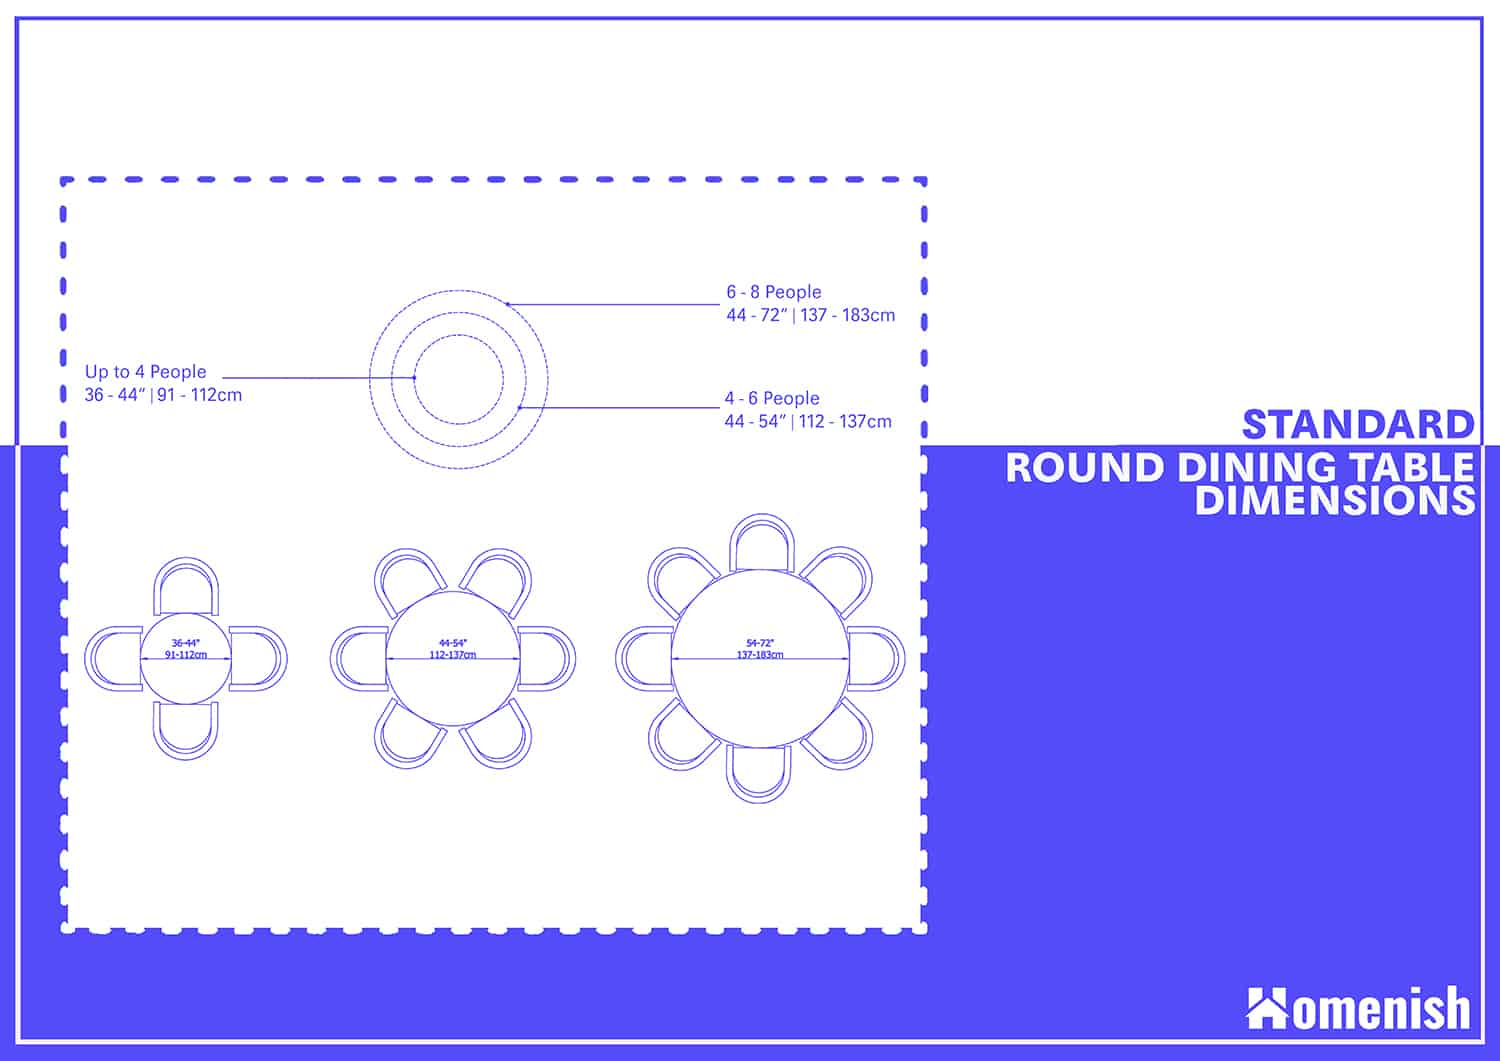 Standard Dining Table Dimensions, What Size Round Table Seat 8